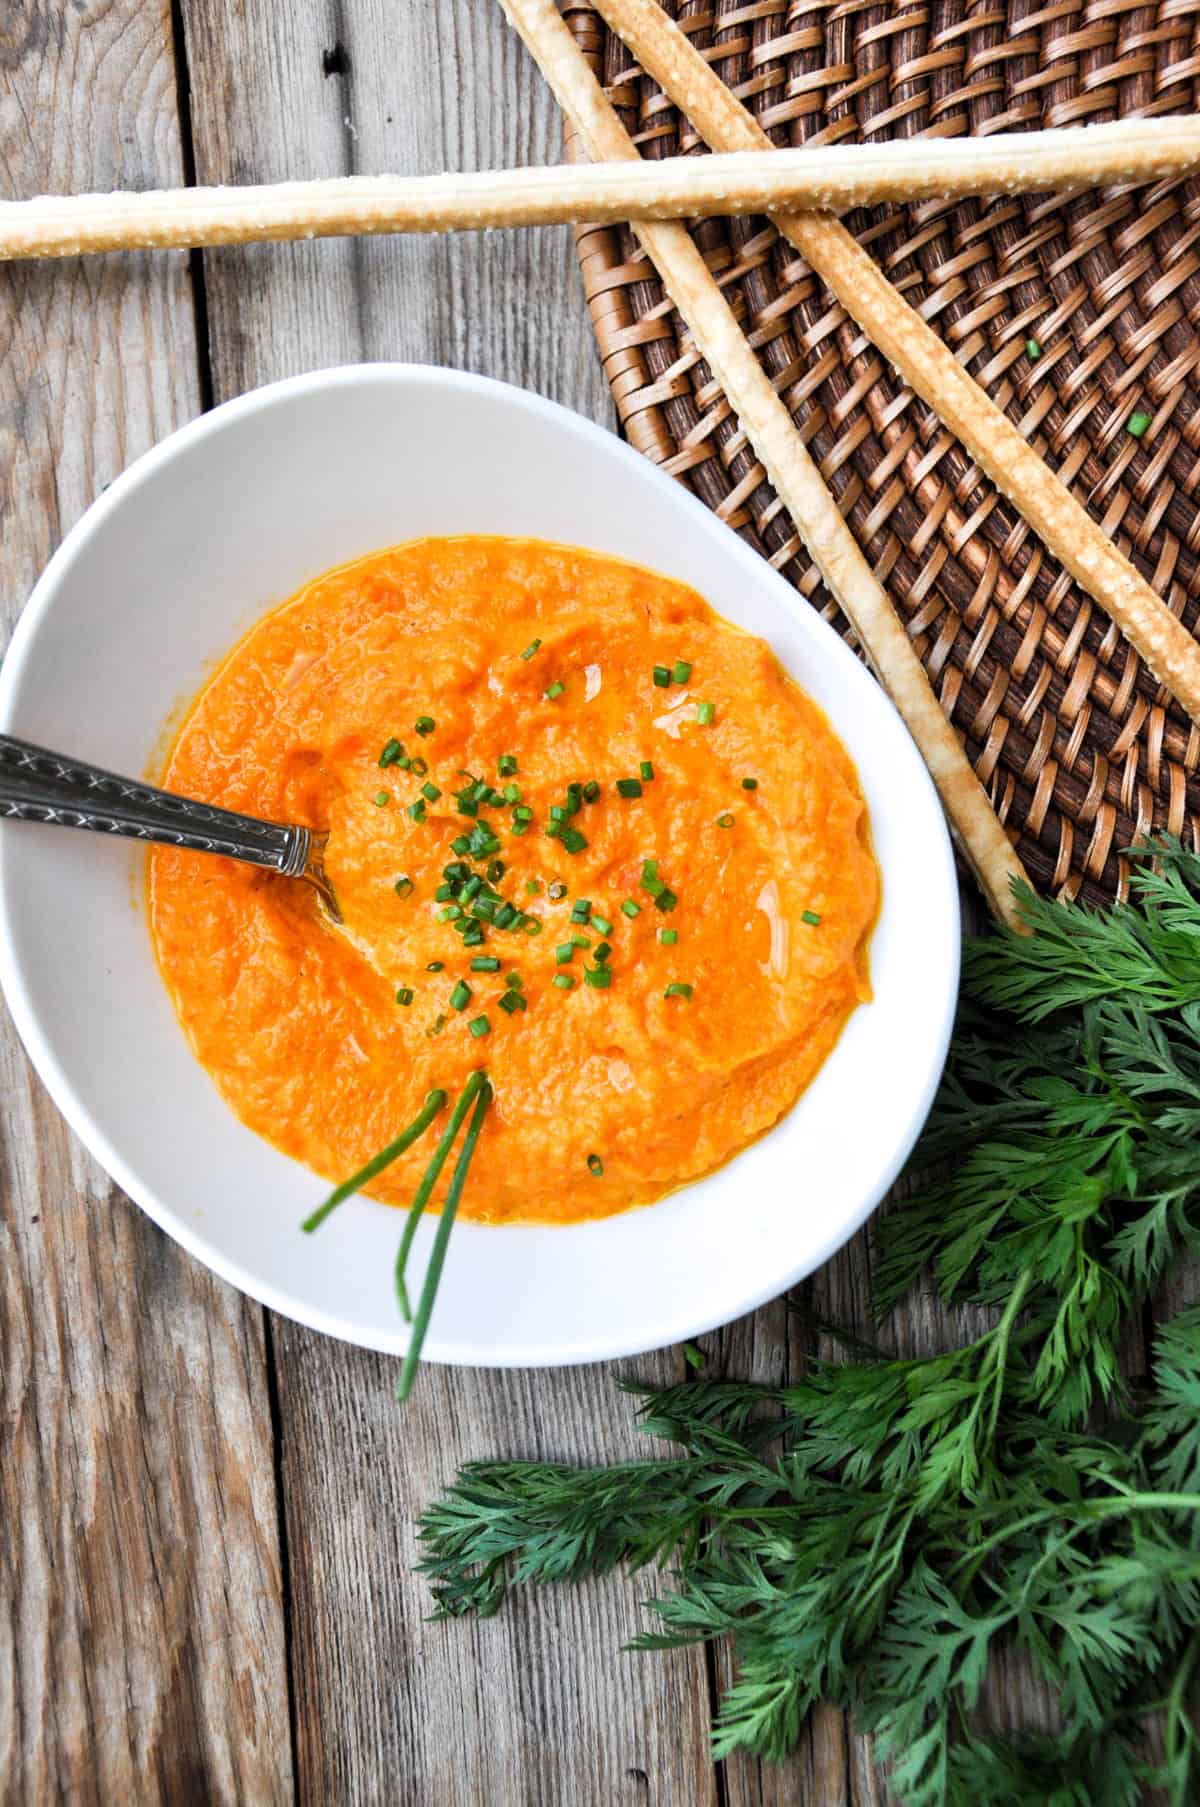 Roasted Carrot Soup with chives